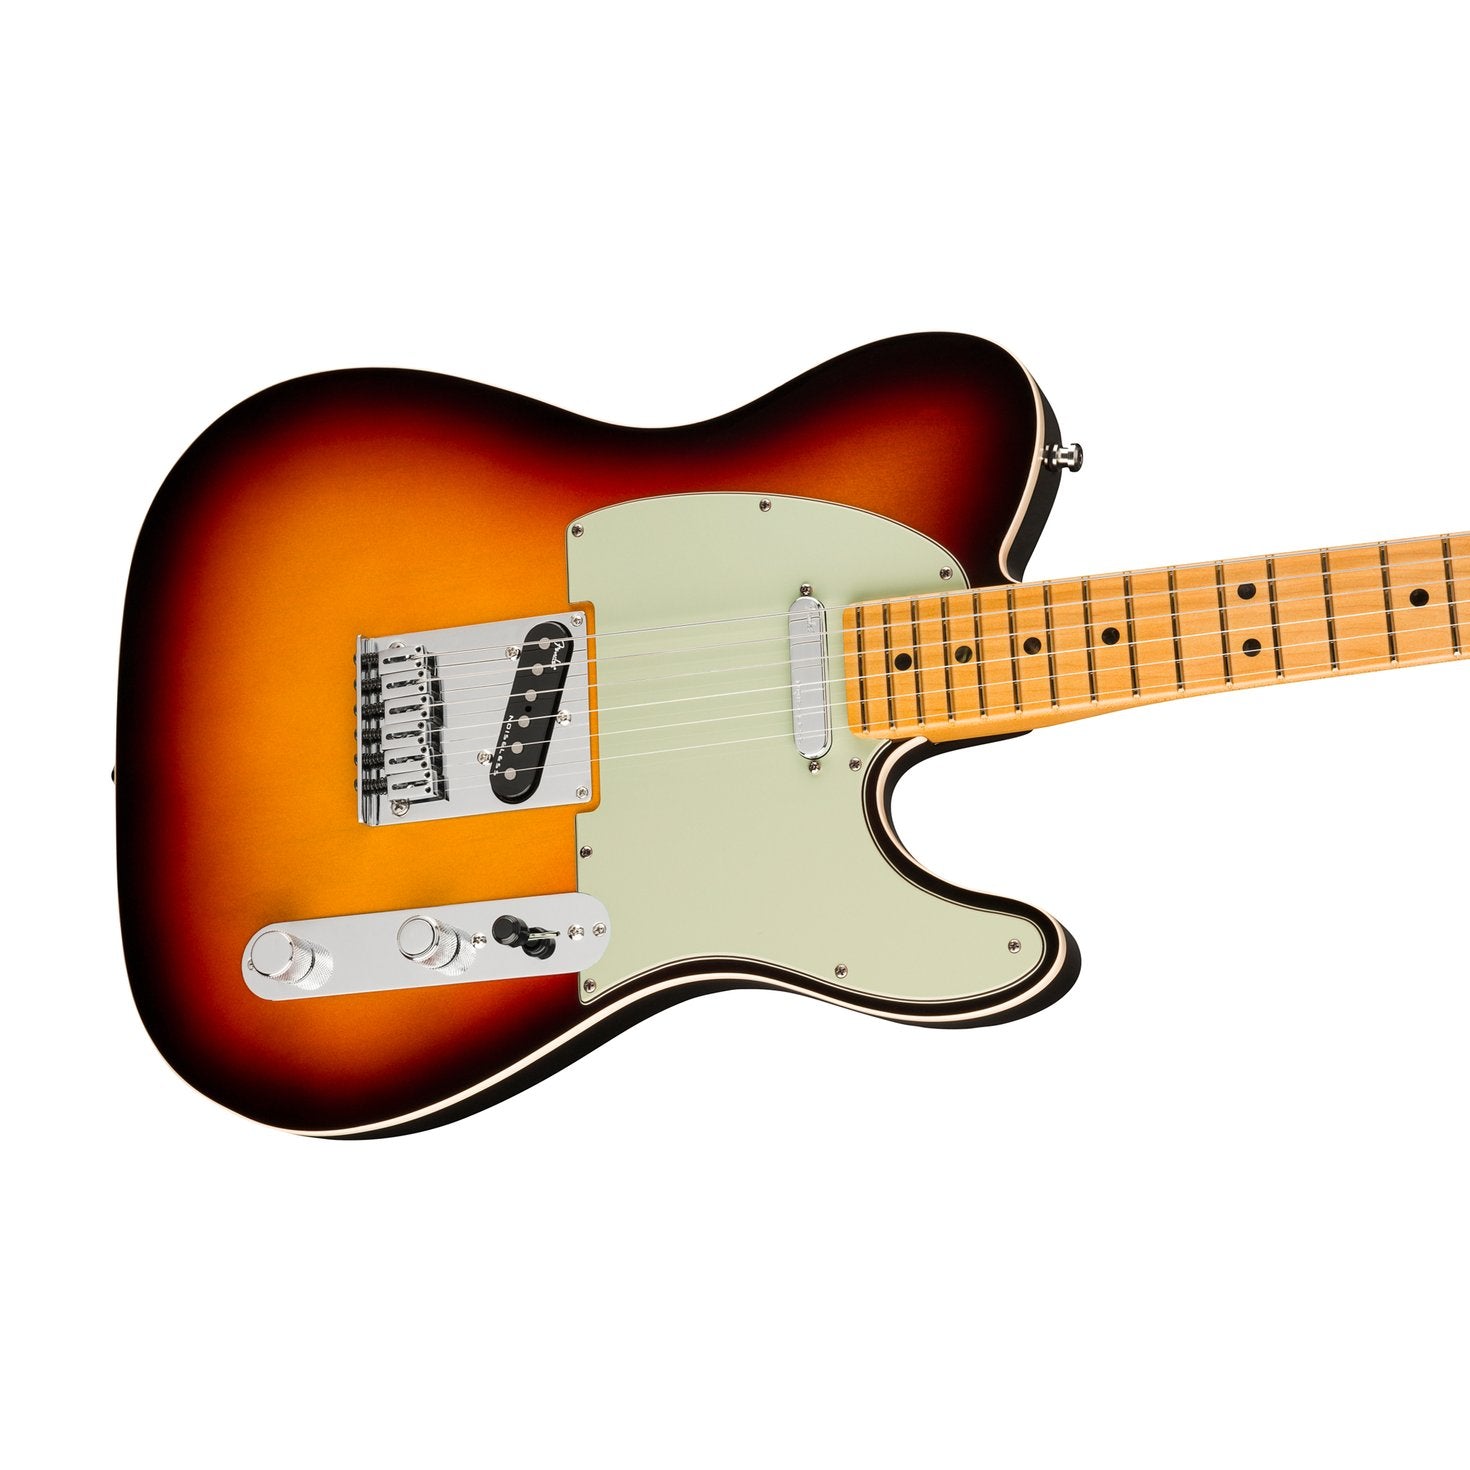 Fender American Ultra Telecaster Electric Guitar, Maple FB, Ultraburst, FENDER, ELECTRIC GUITAR, fender-electric-guitar-f03-011-8032-712, ZOSO MUSIC SDN BHD